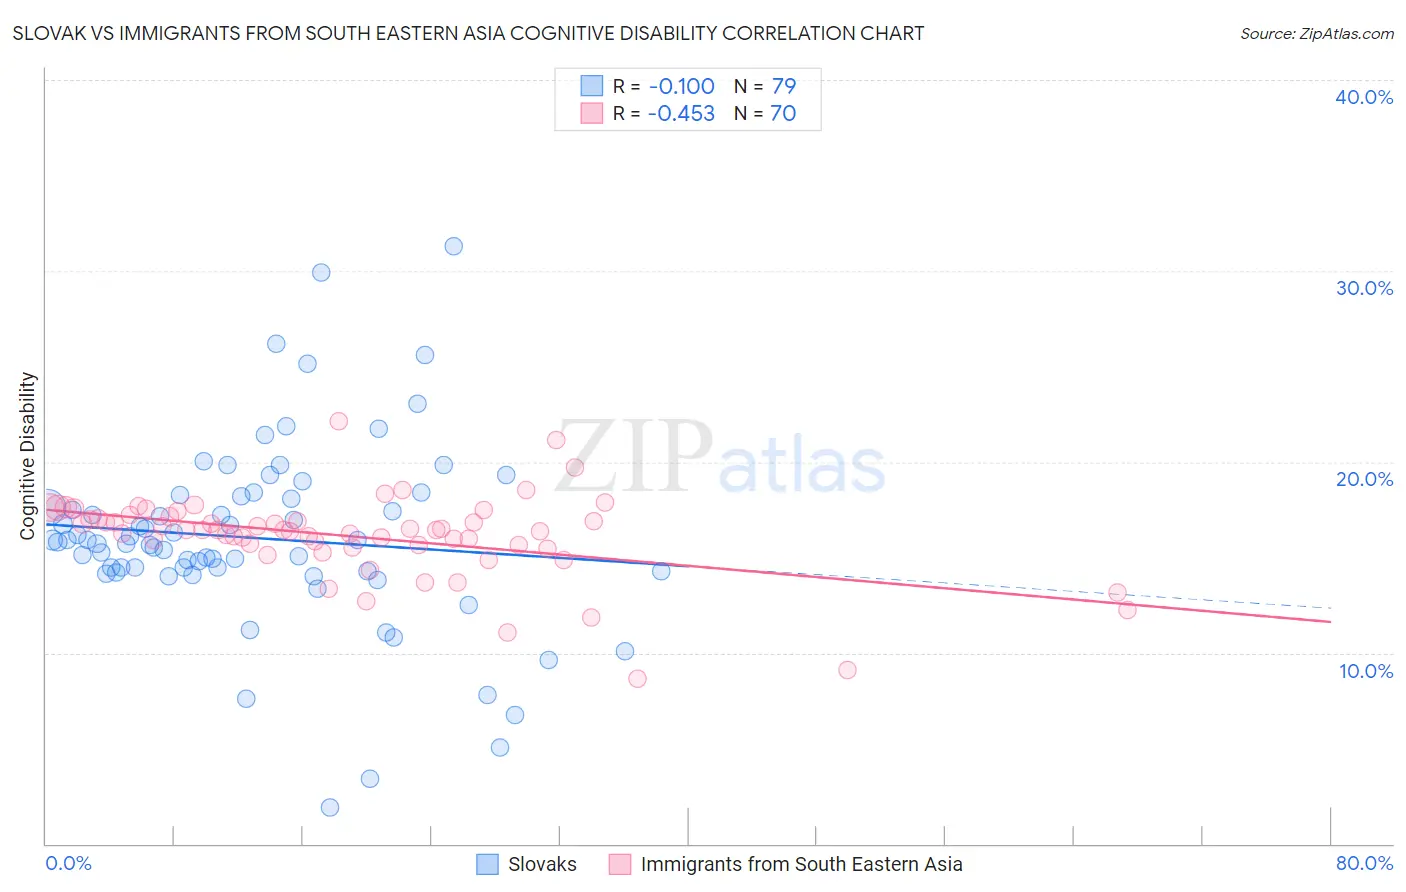 Slovak vs Immigrants from South Eastern Asia Cognitive Disability